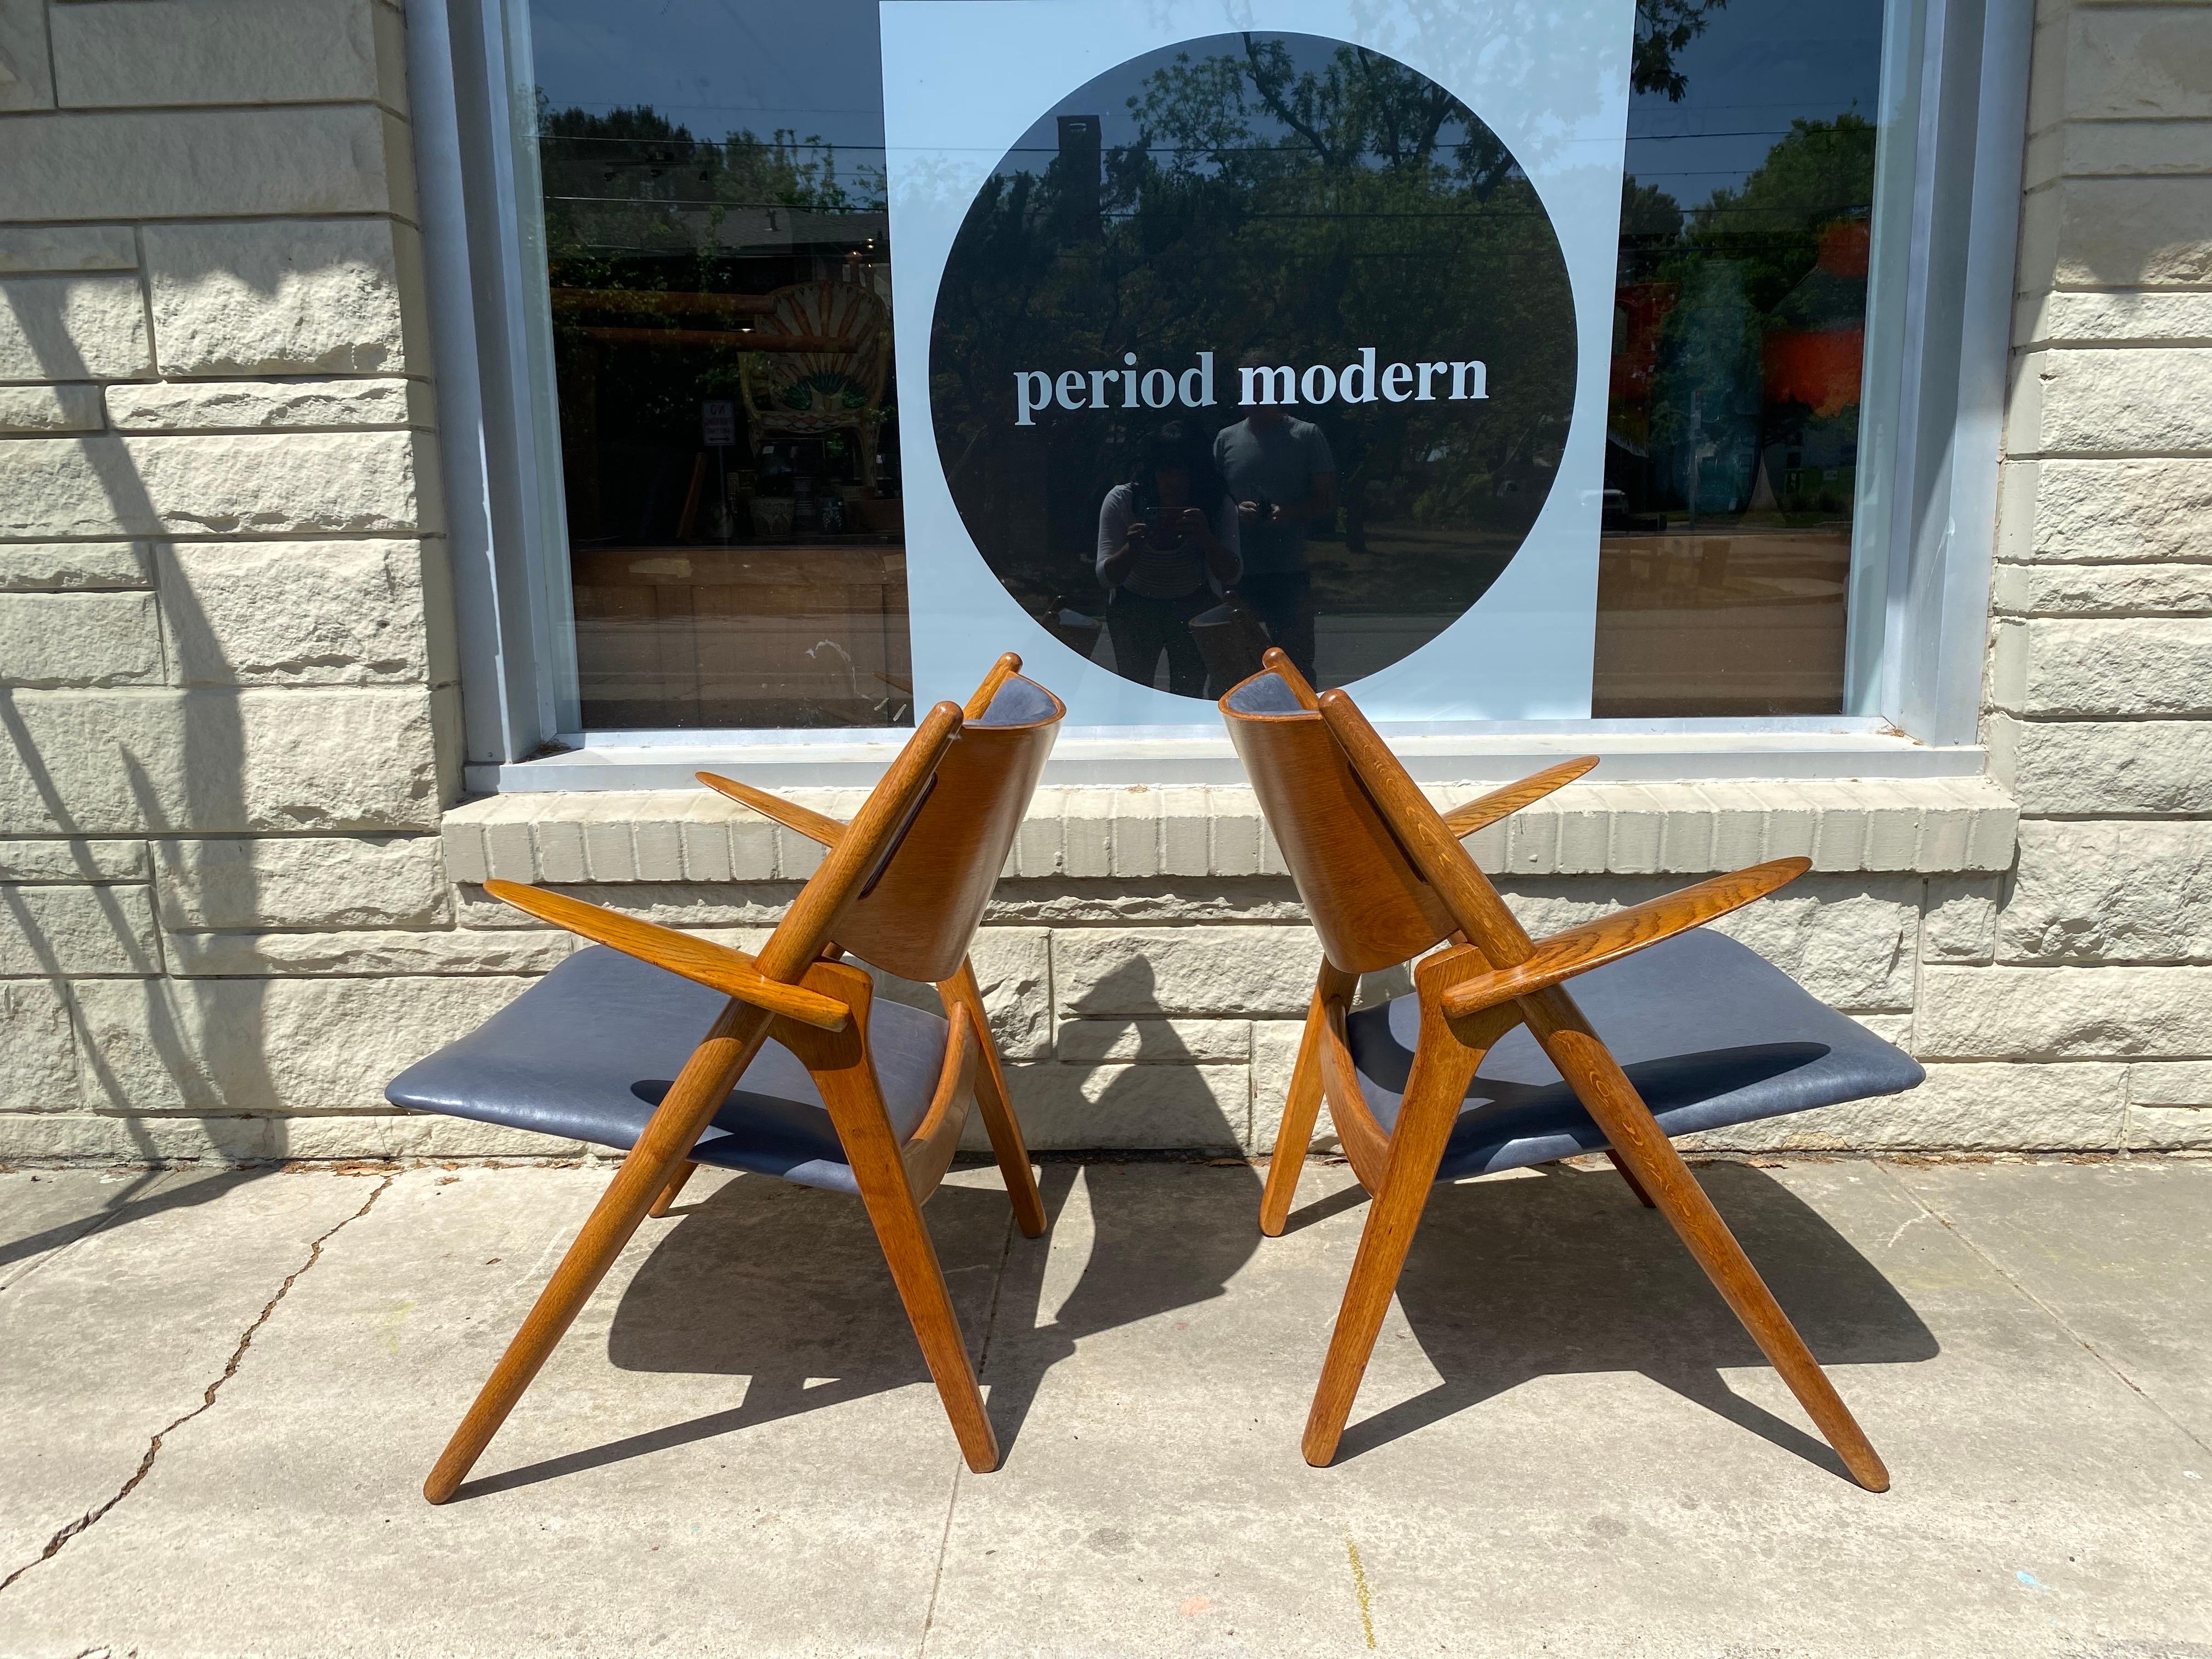 Pair of iconic Danish modern Sawbuck CH28 chairs by one of the most influential designers of the 20th century, Hans Wegner for Carl Hansen & Son of Denmark. The sawbuck chair is known for its clean lines and unique look. This pair of Mid-Century